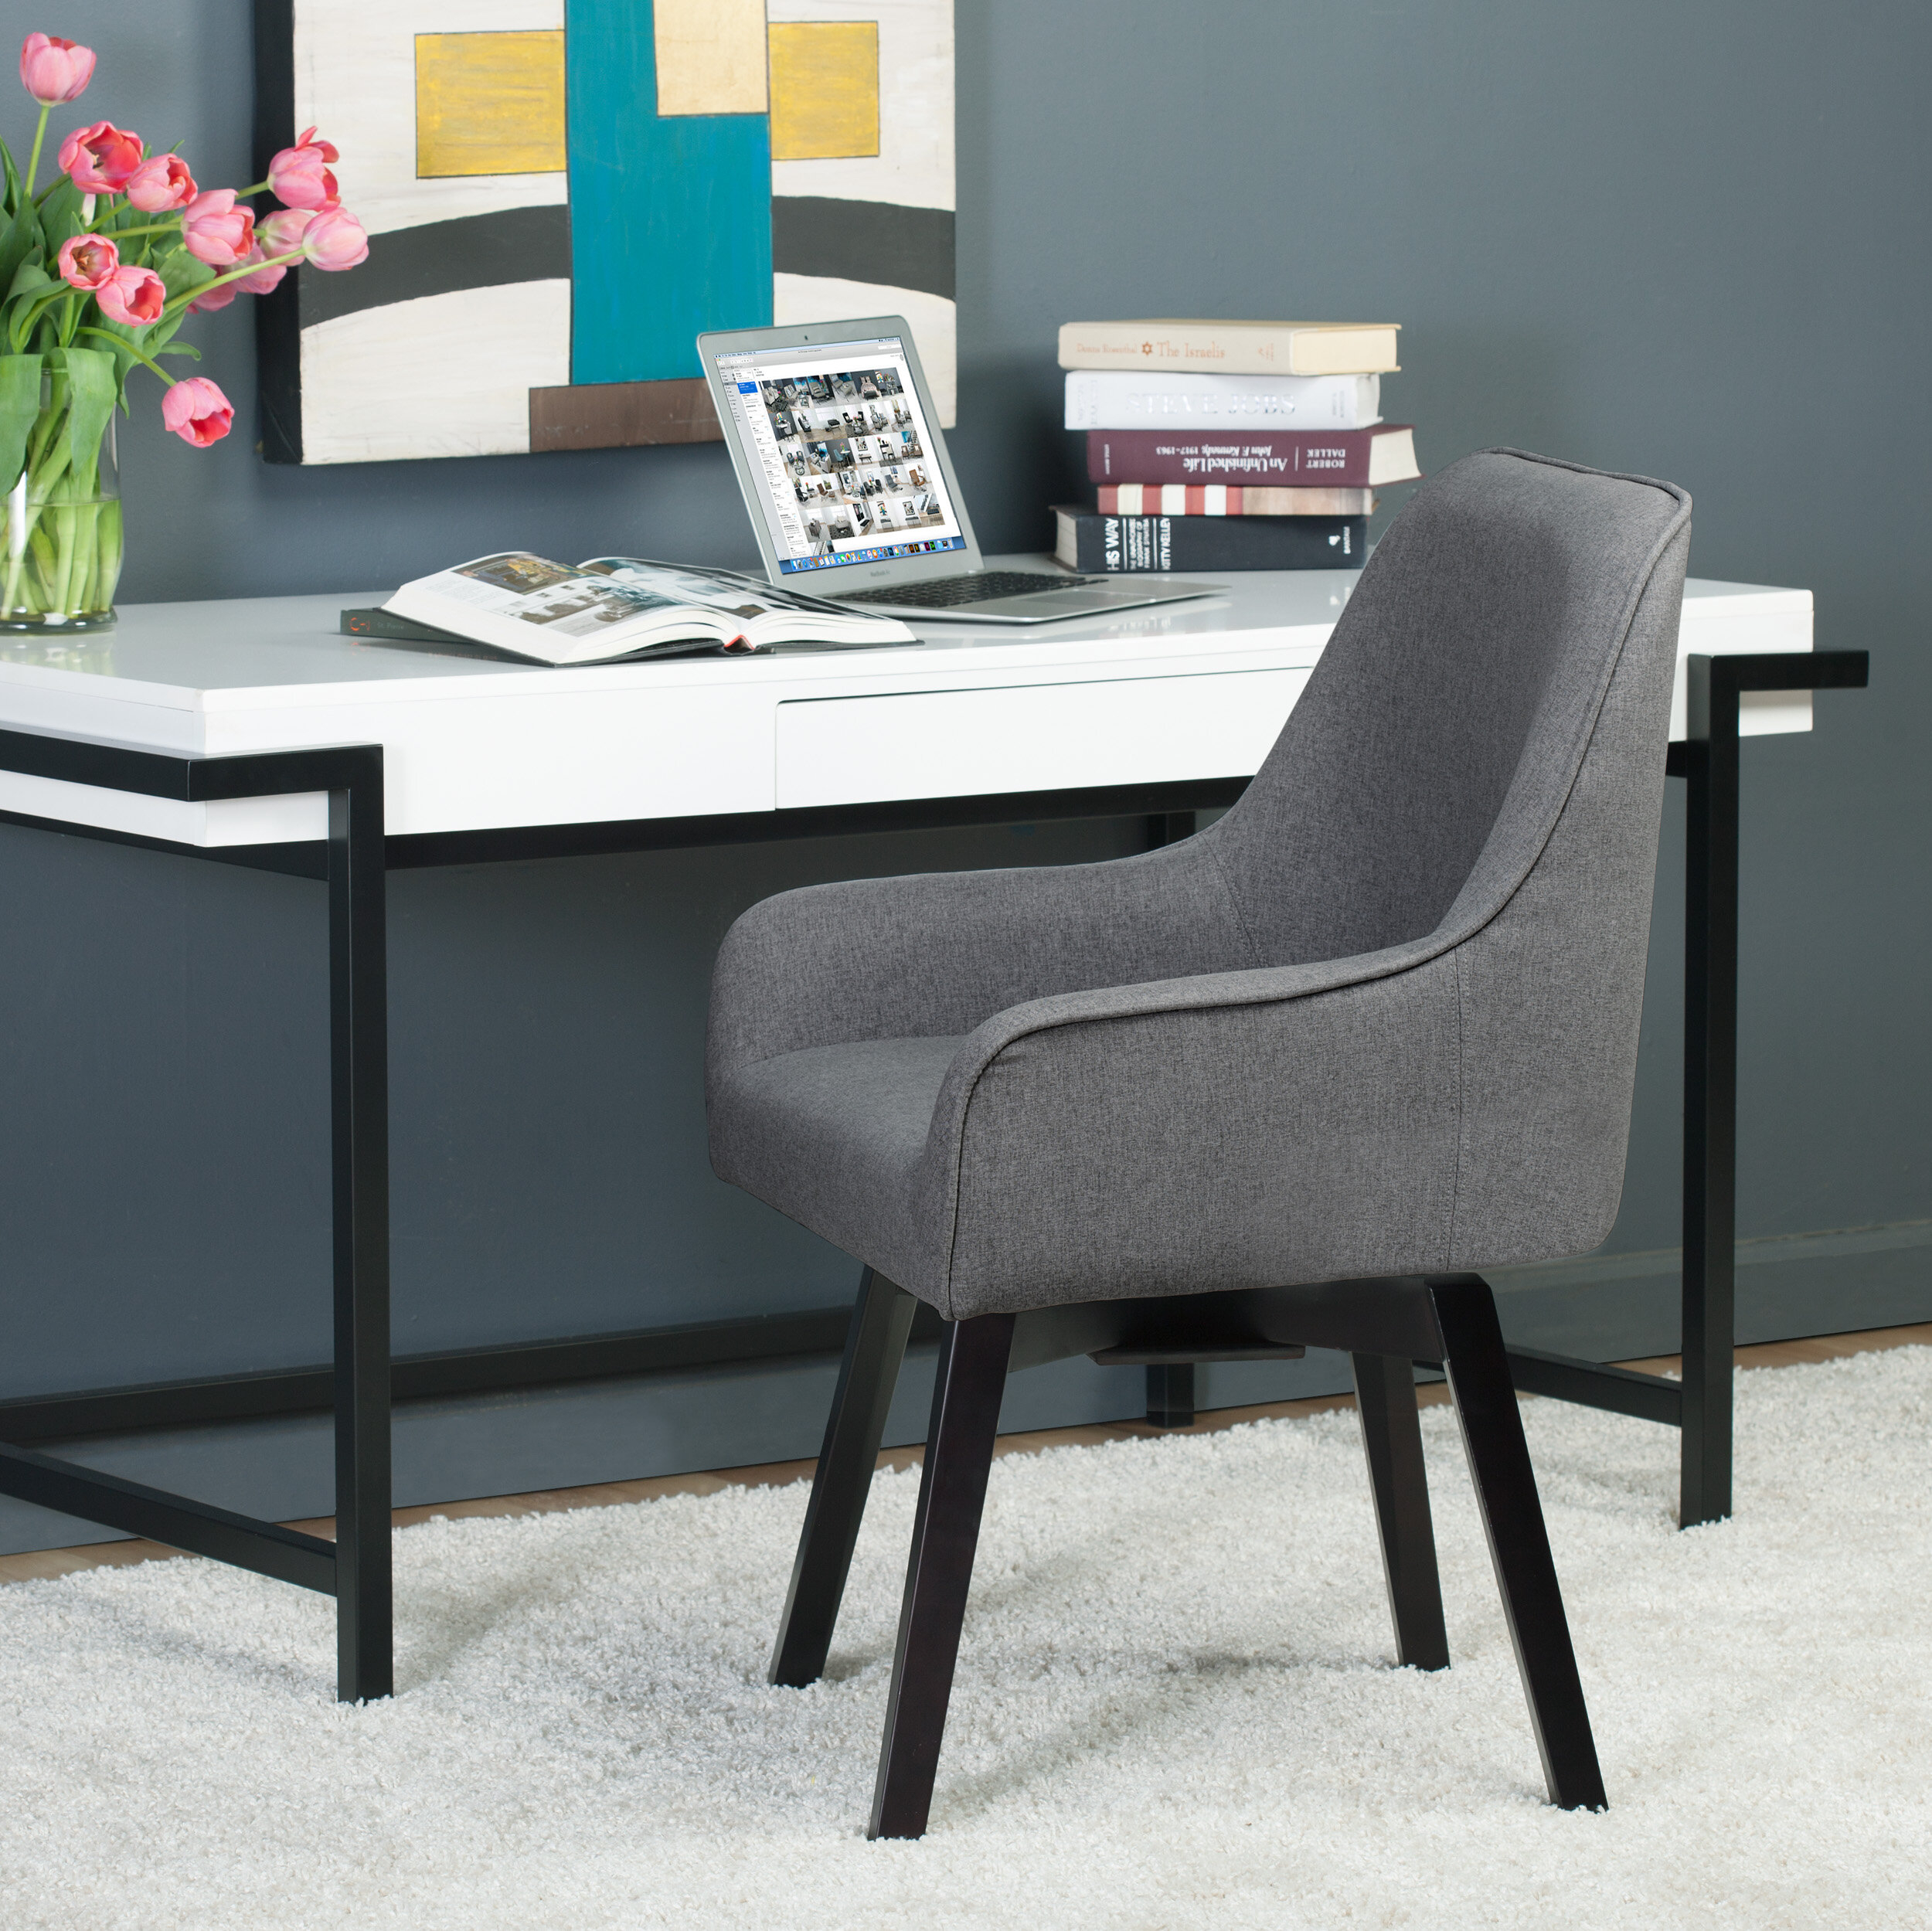 A Desk Chair Without Wheels, Upholstered Desk Chair No Wheels